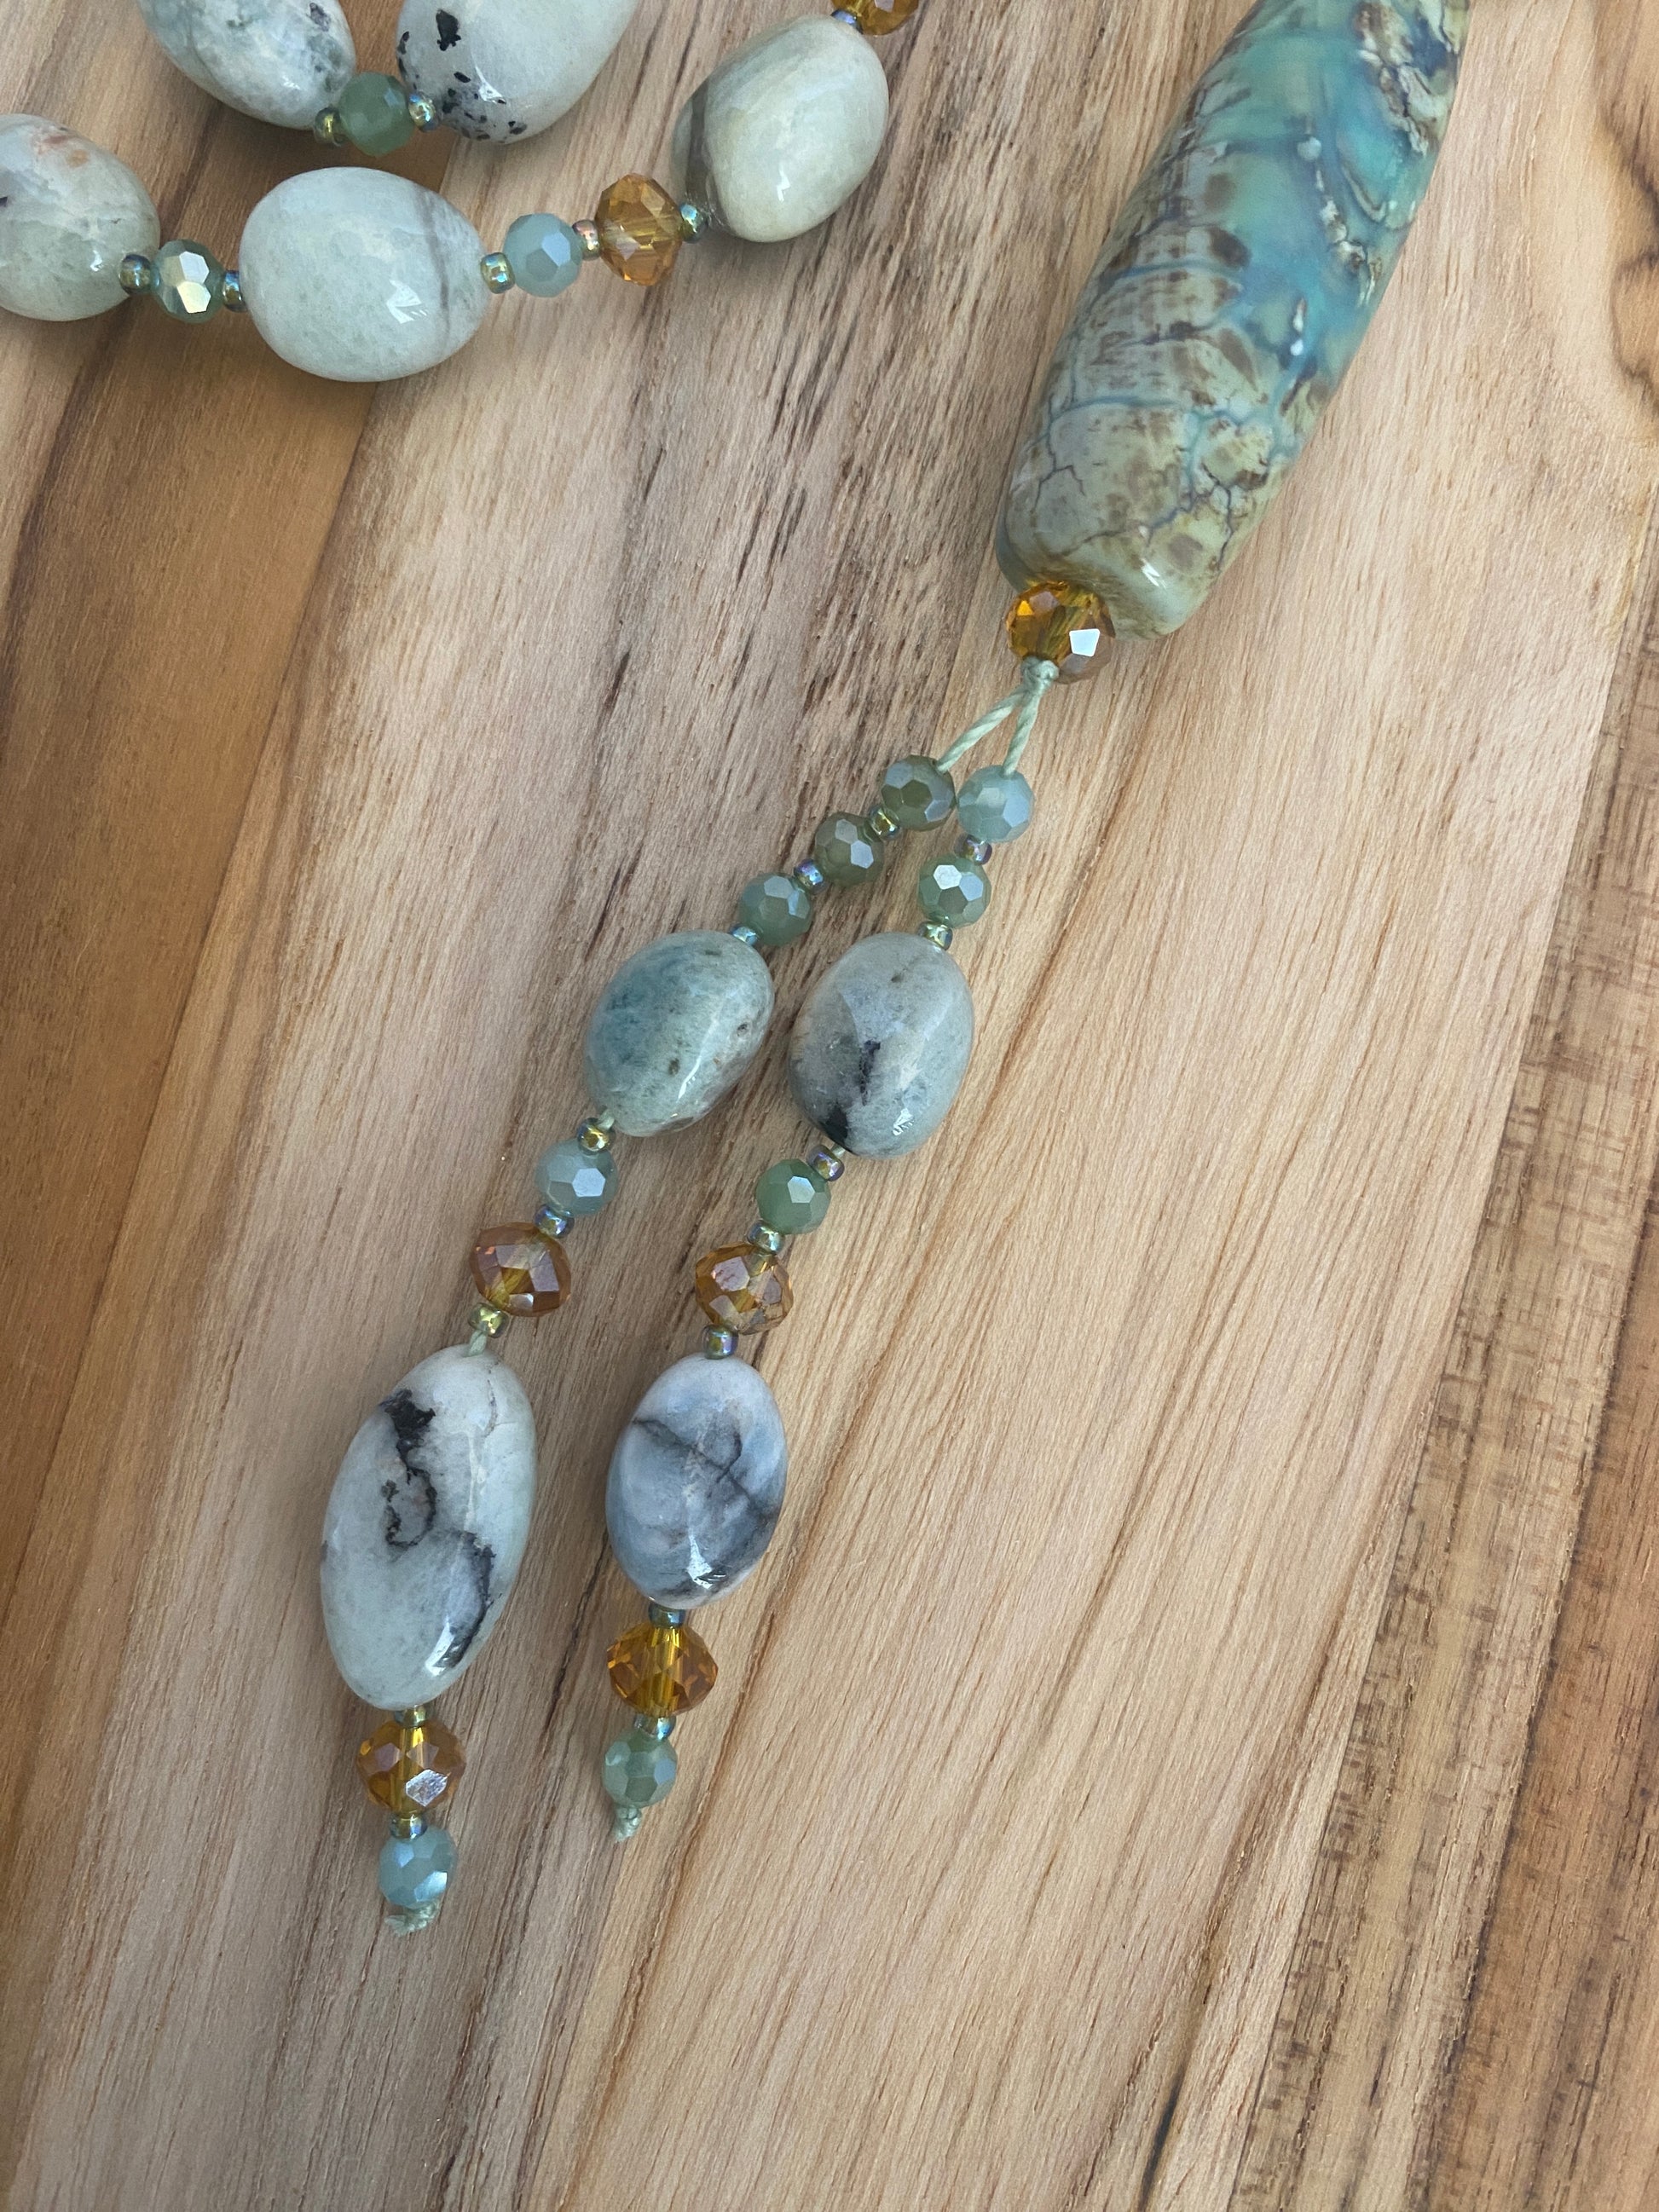 30" Long Amazonite Beaded Necklace with Agate Column Bead Focal - My Urban Gems